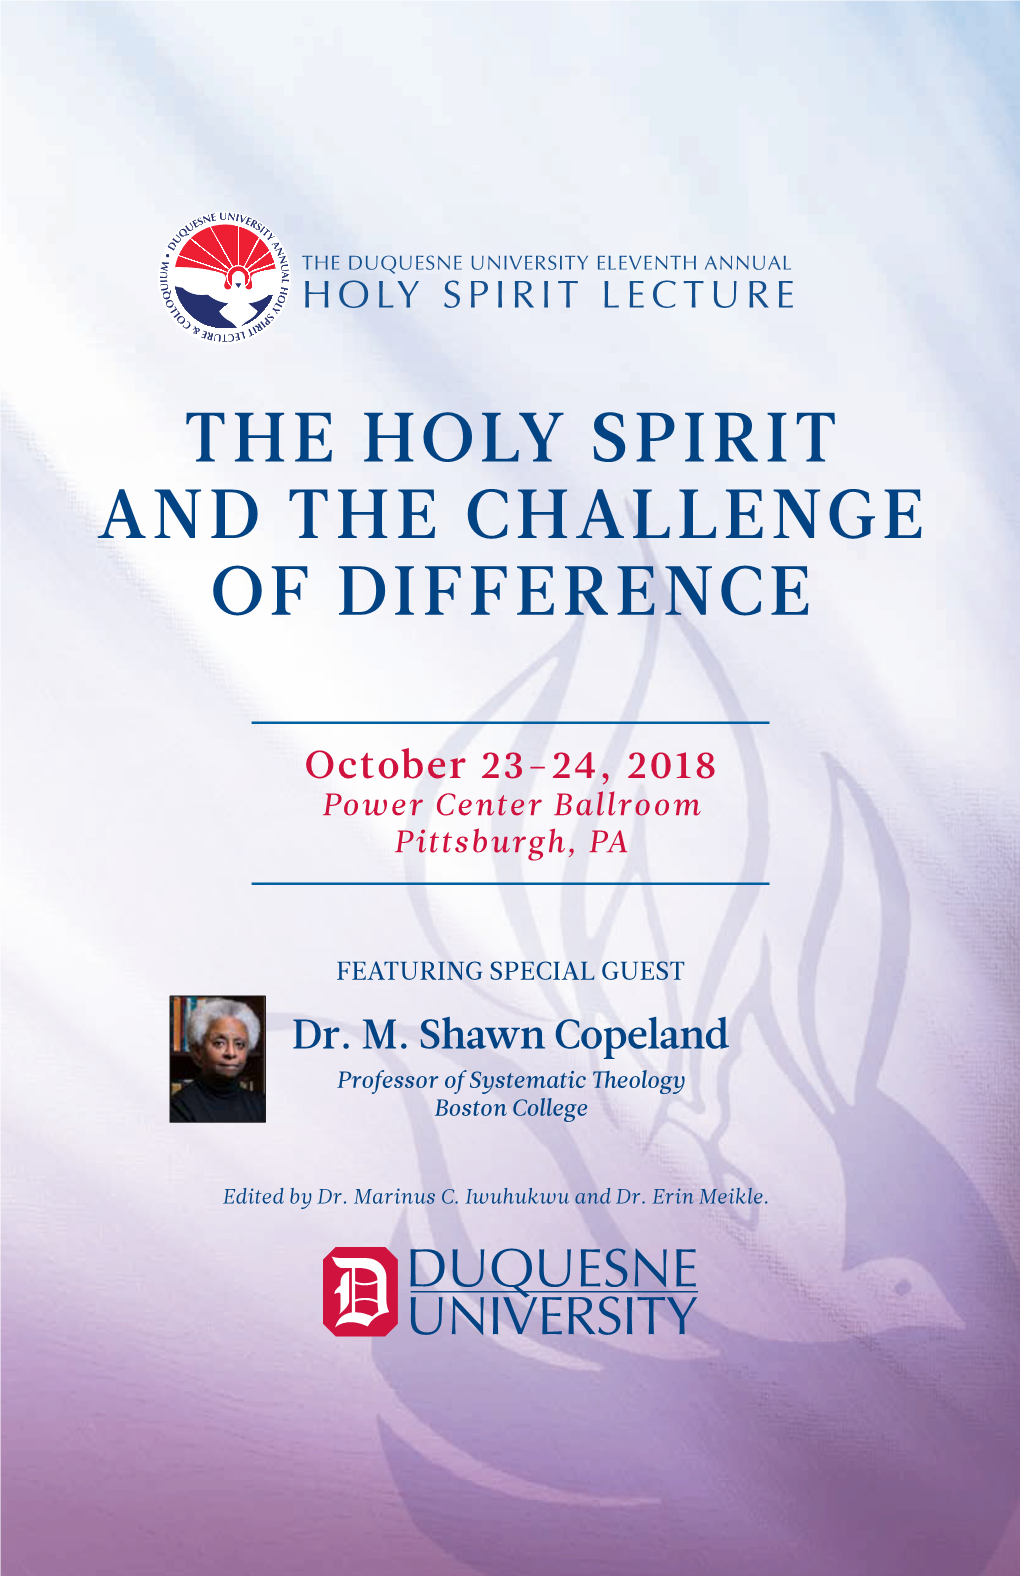 The Holy Spirit and the Challenge of Difference